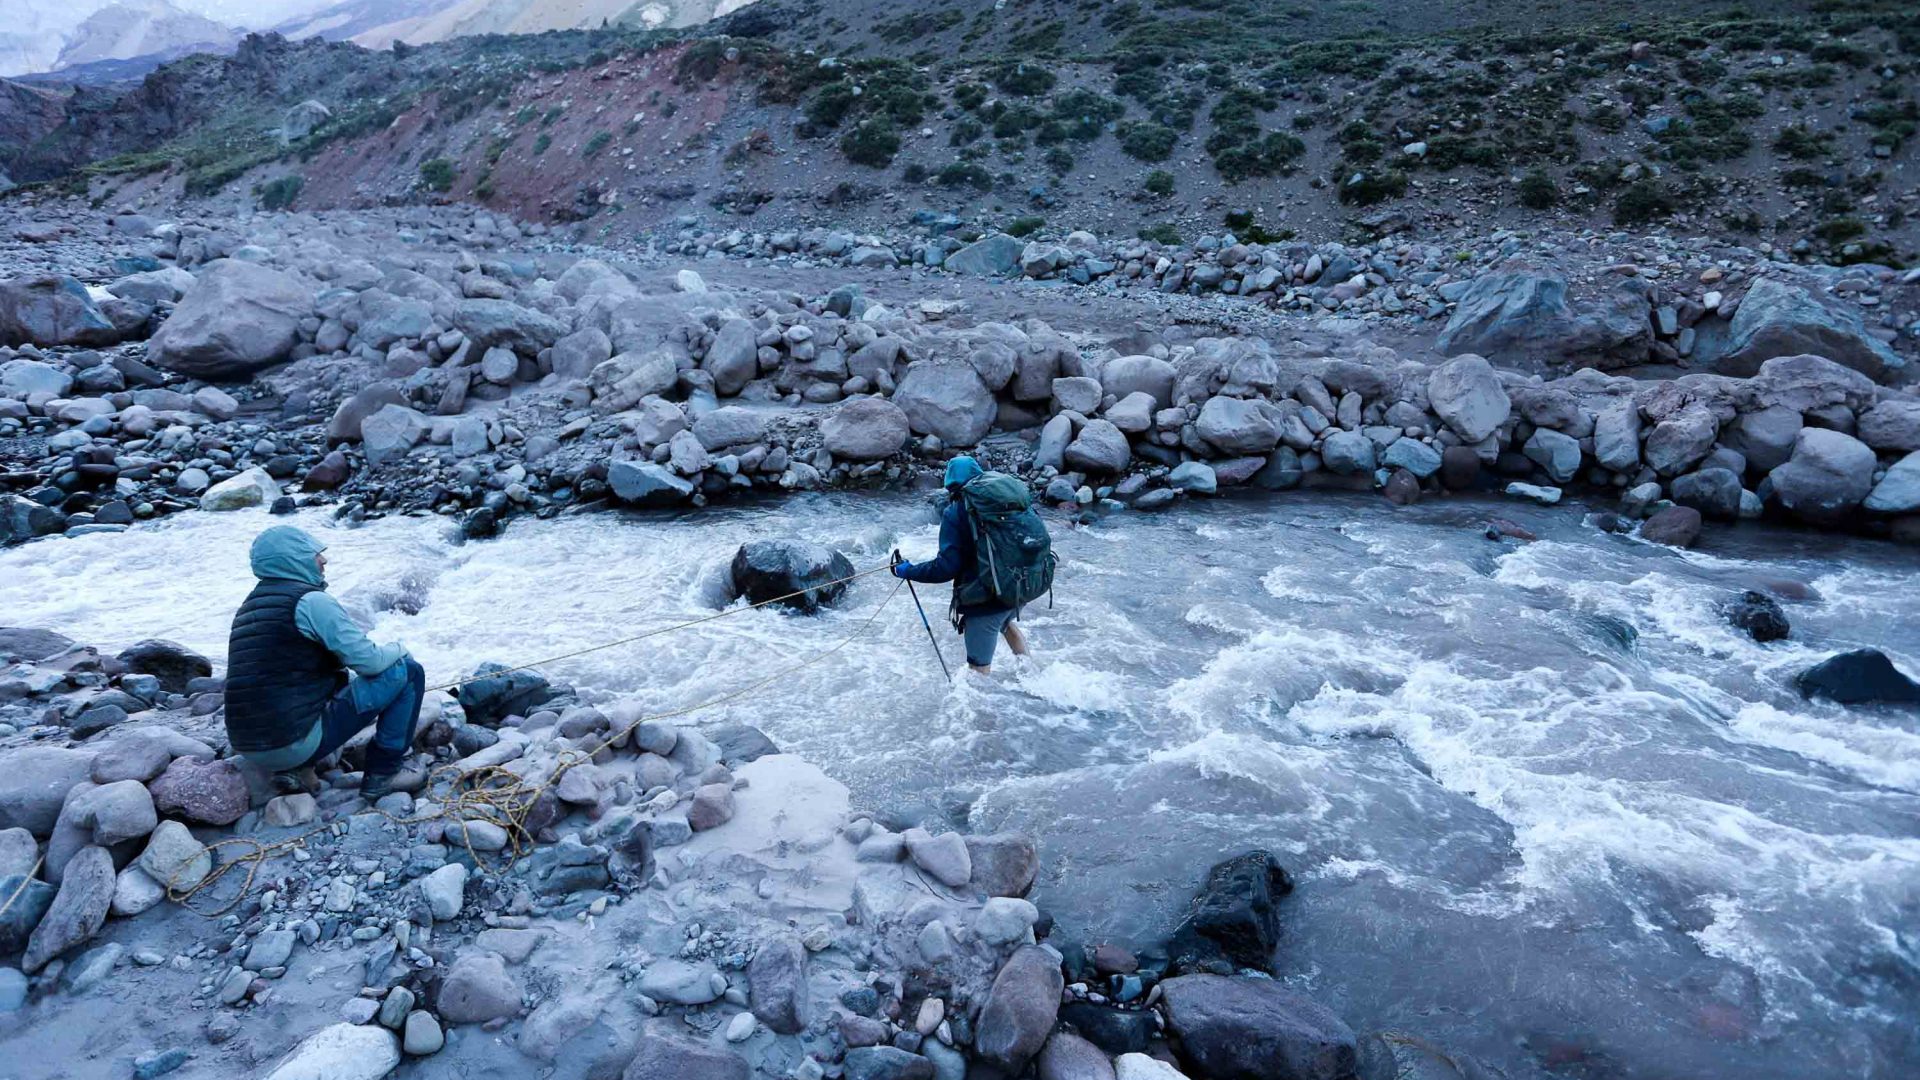 A hiker crosses a stream wearing his backpack.